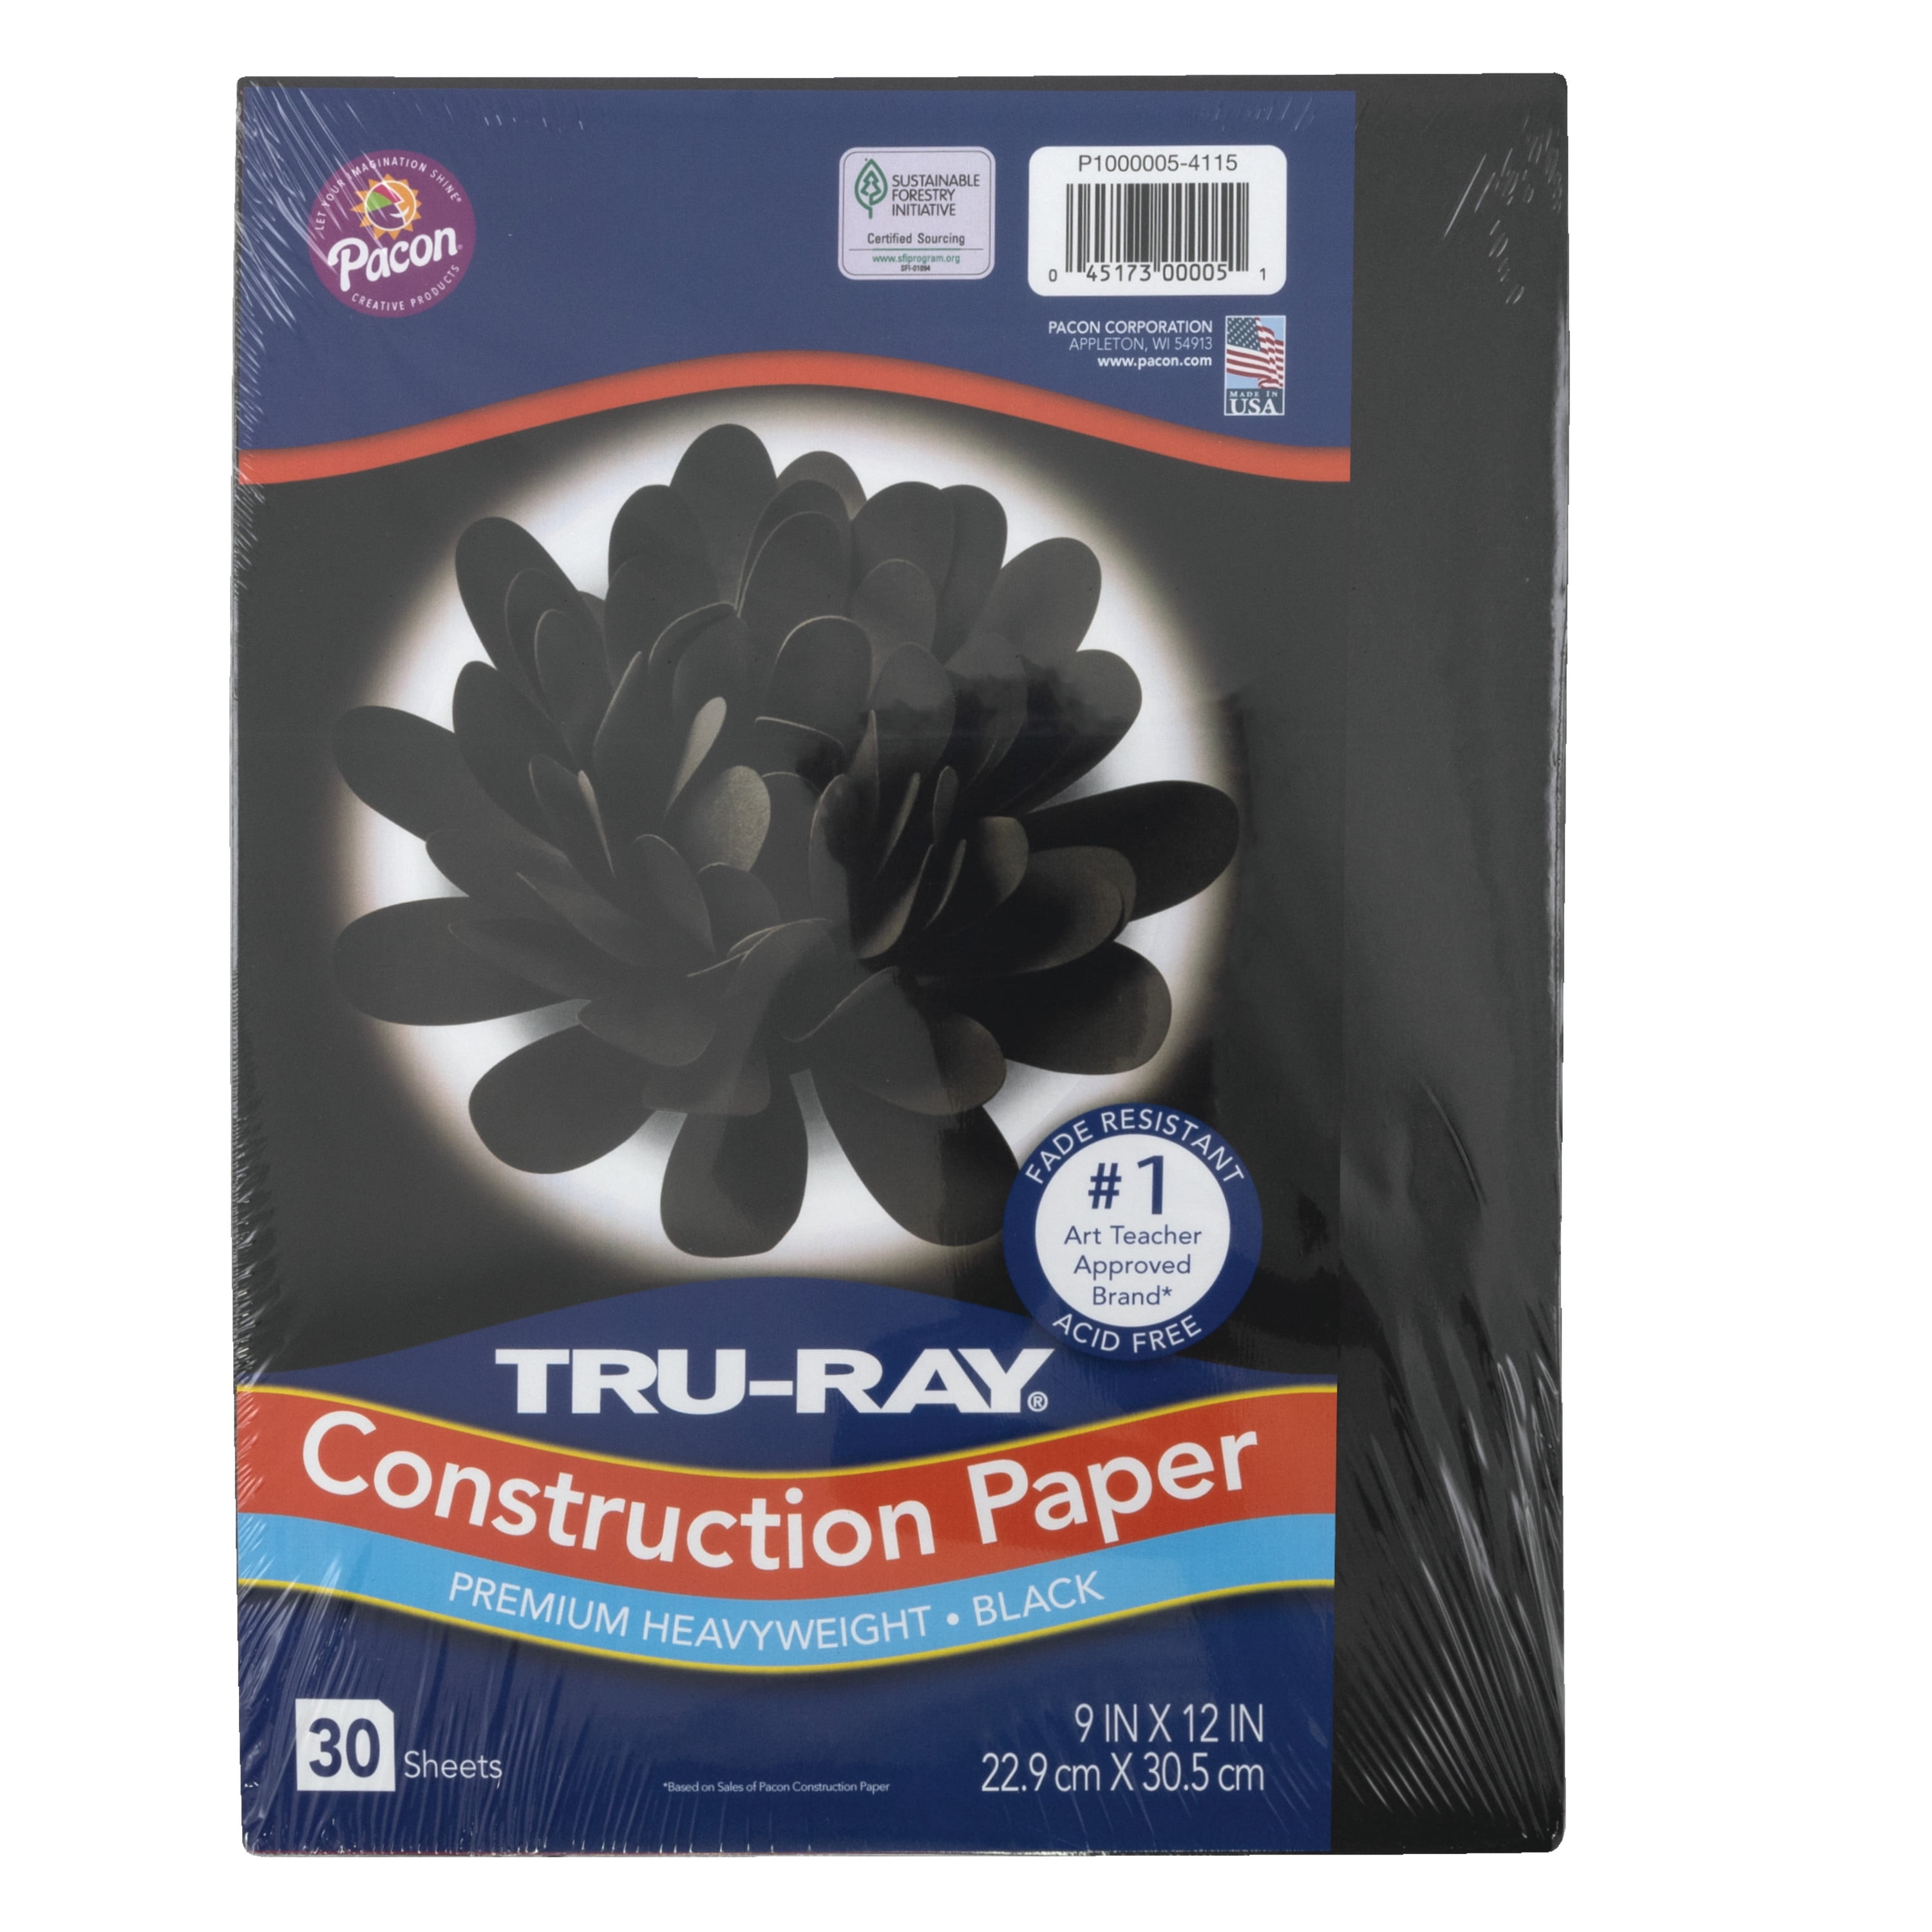 TRU-RAY® CONSTRUCTION PAPER 9 X 12 TAN COLOR, 50 SHEETS - Multi access  office